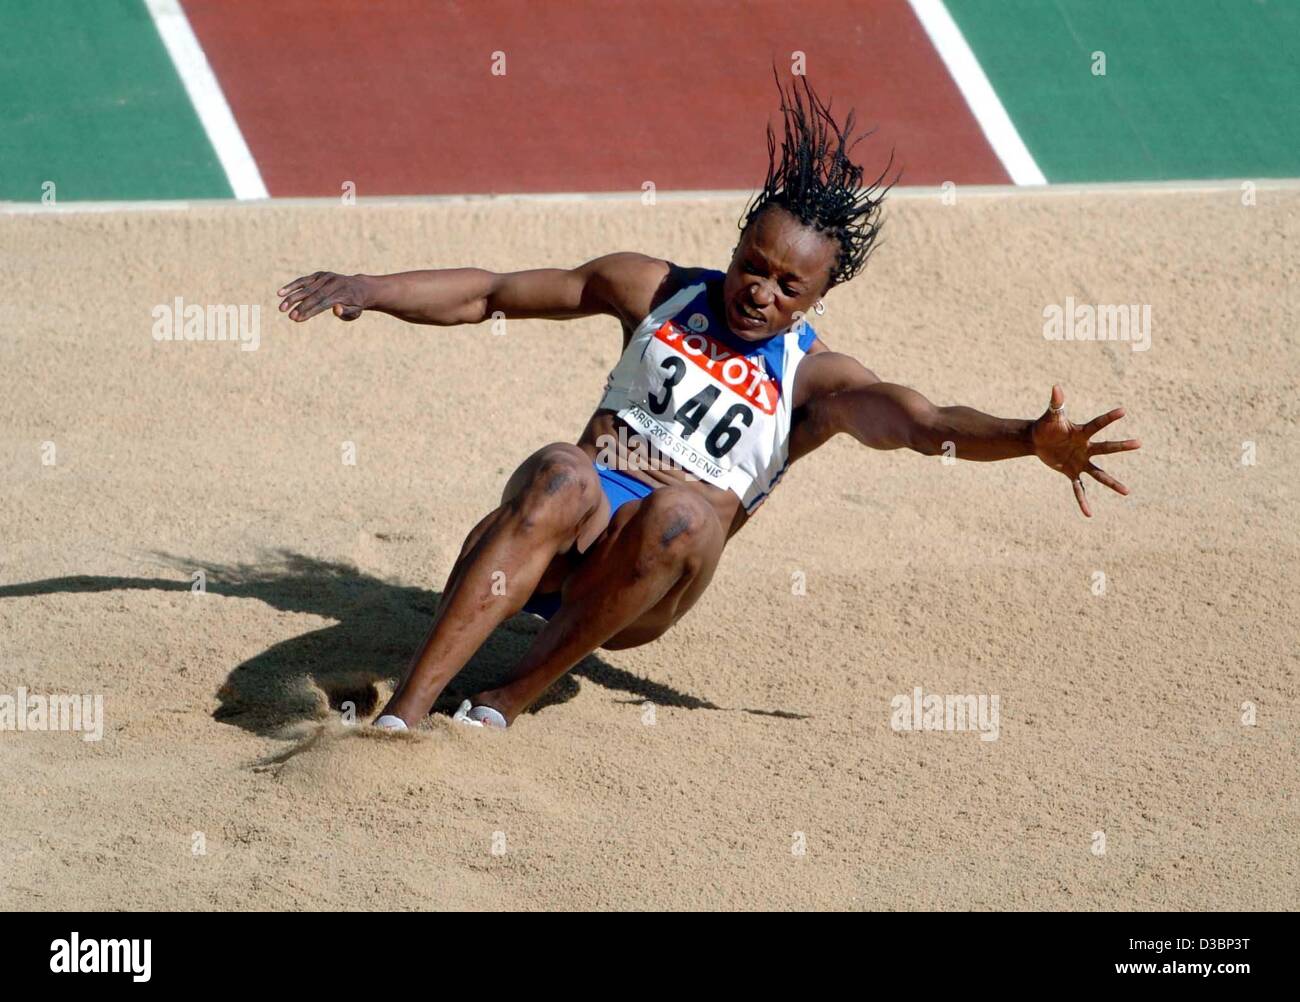 (dpa) - French athlete Eunice Barber lands in the sand during an attempt at the women's long jump competition in the heptathlon event at the 9th IAAF Athletic World Championships at the Stade de France in Paris, 24 August 2003. Barber won the silver medal. Stock Photo